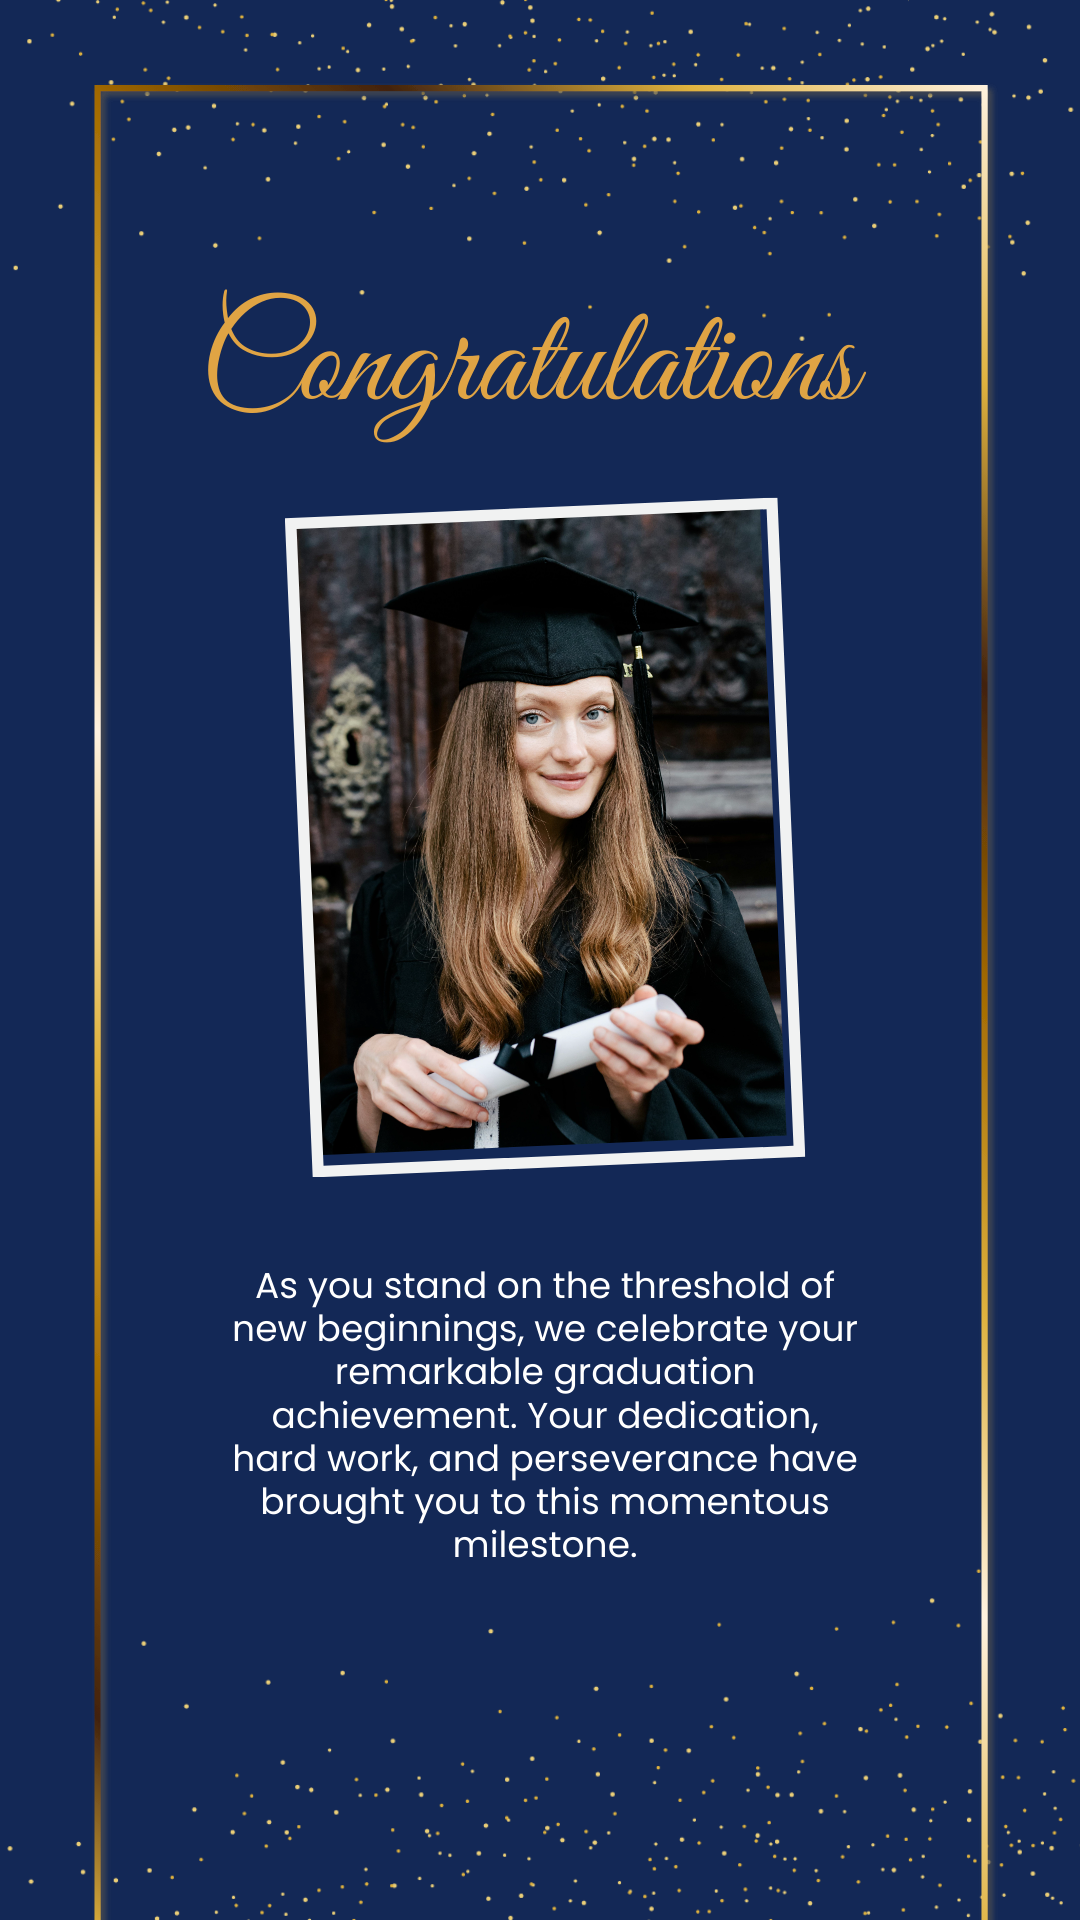 Congratulations to graduate Greeting Card Template